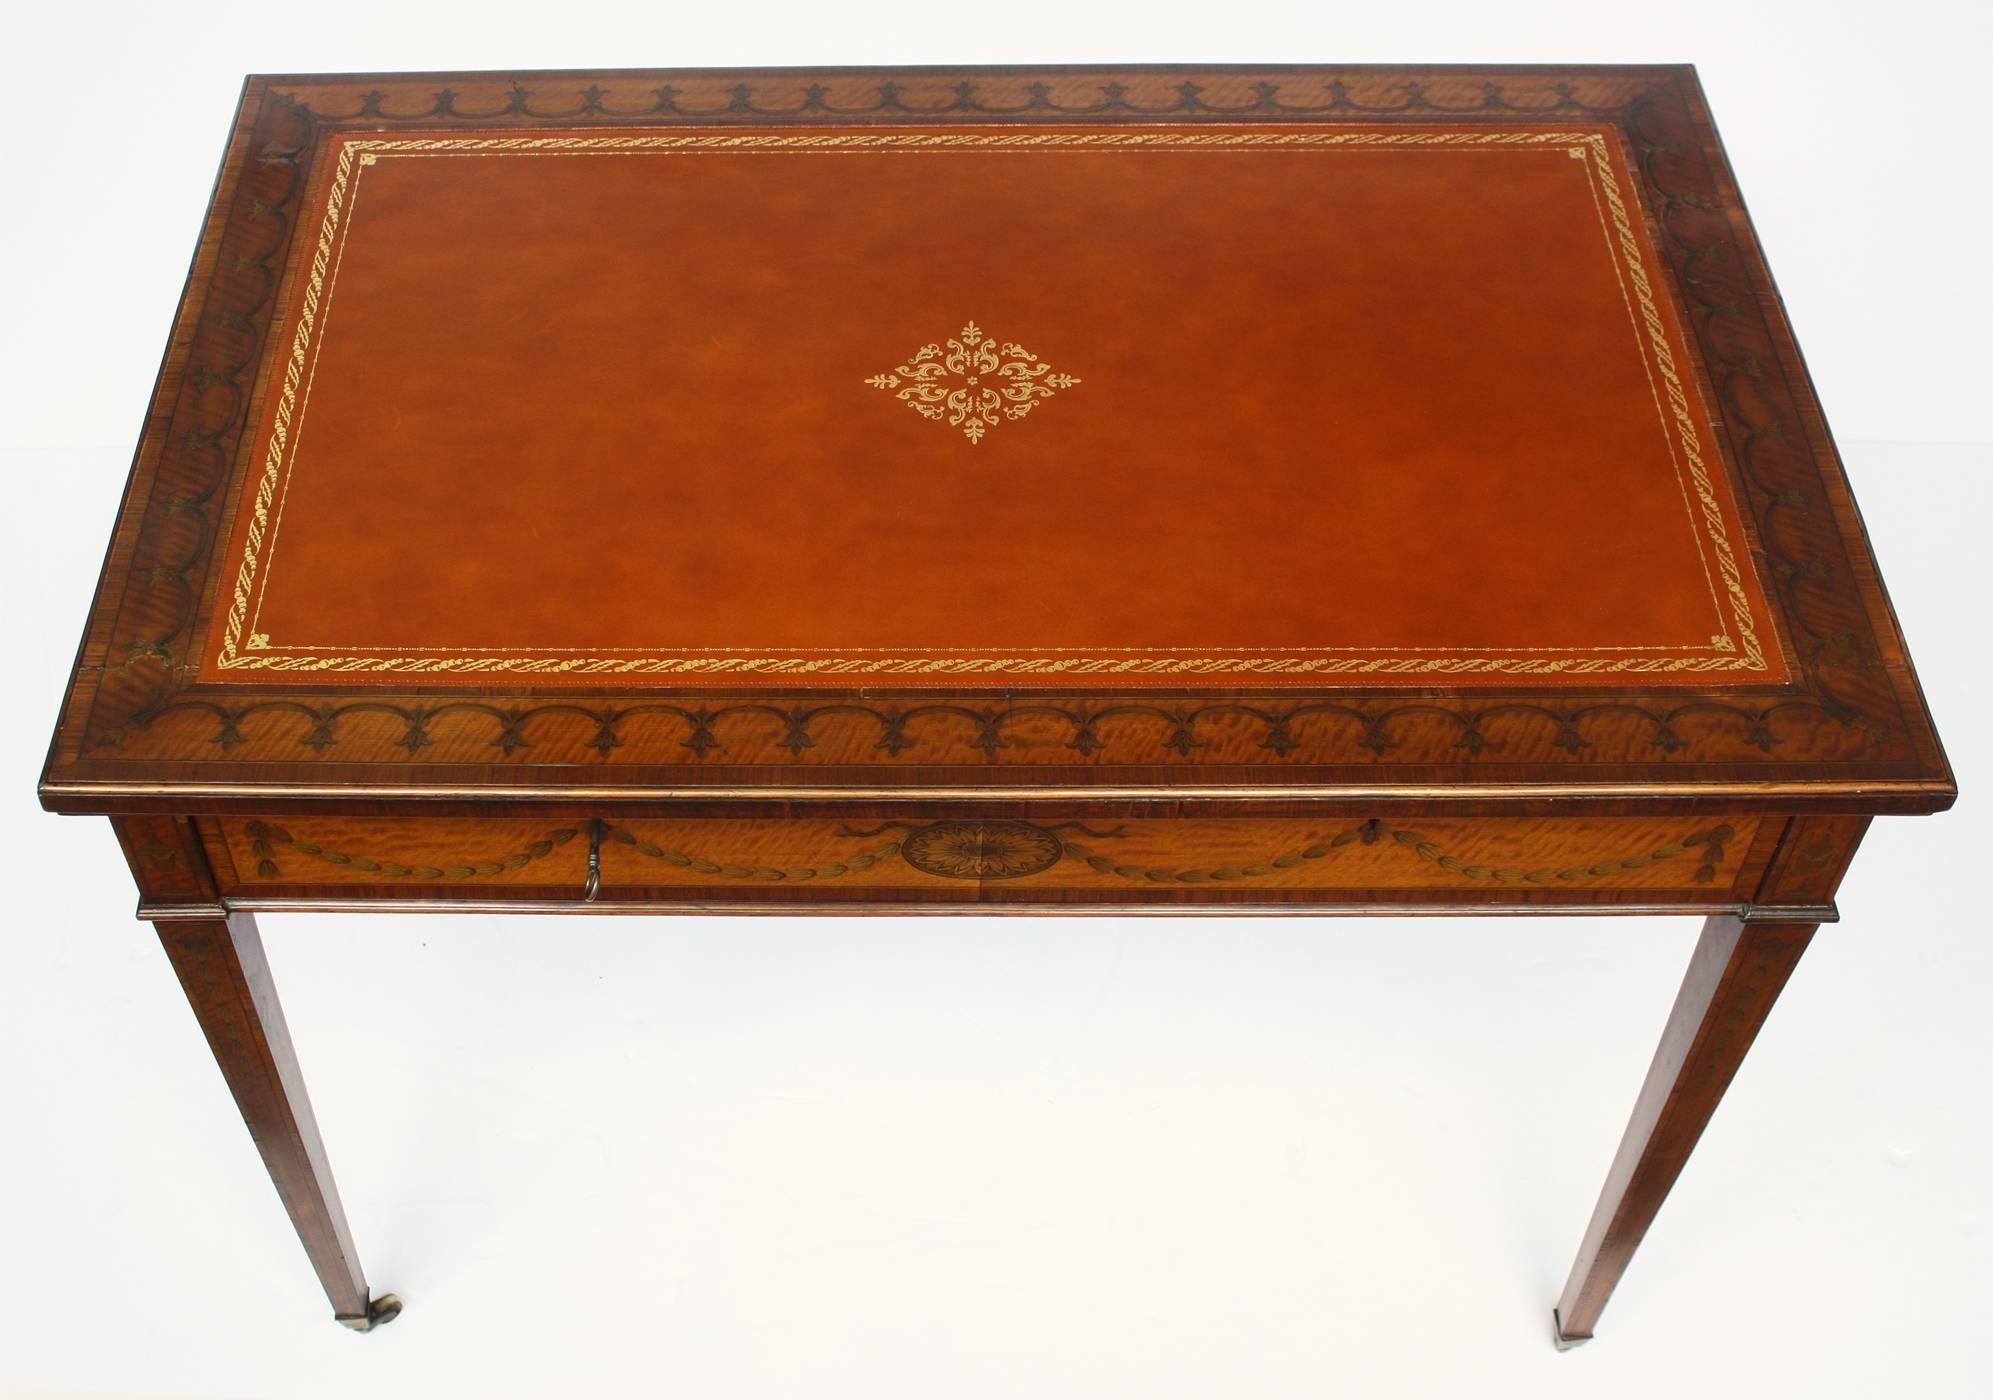 A Sheraton style, satinwood Revival writing table with a variety of inlays, scalloped border inlays with bellflower inlay top with a cross-banded edge. Bellflower inlay swags and bellflower chains across the long single drawer, apron and down each